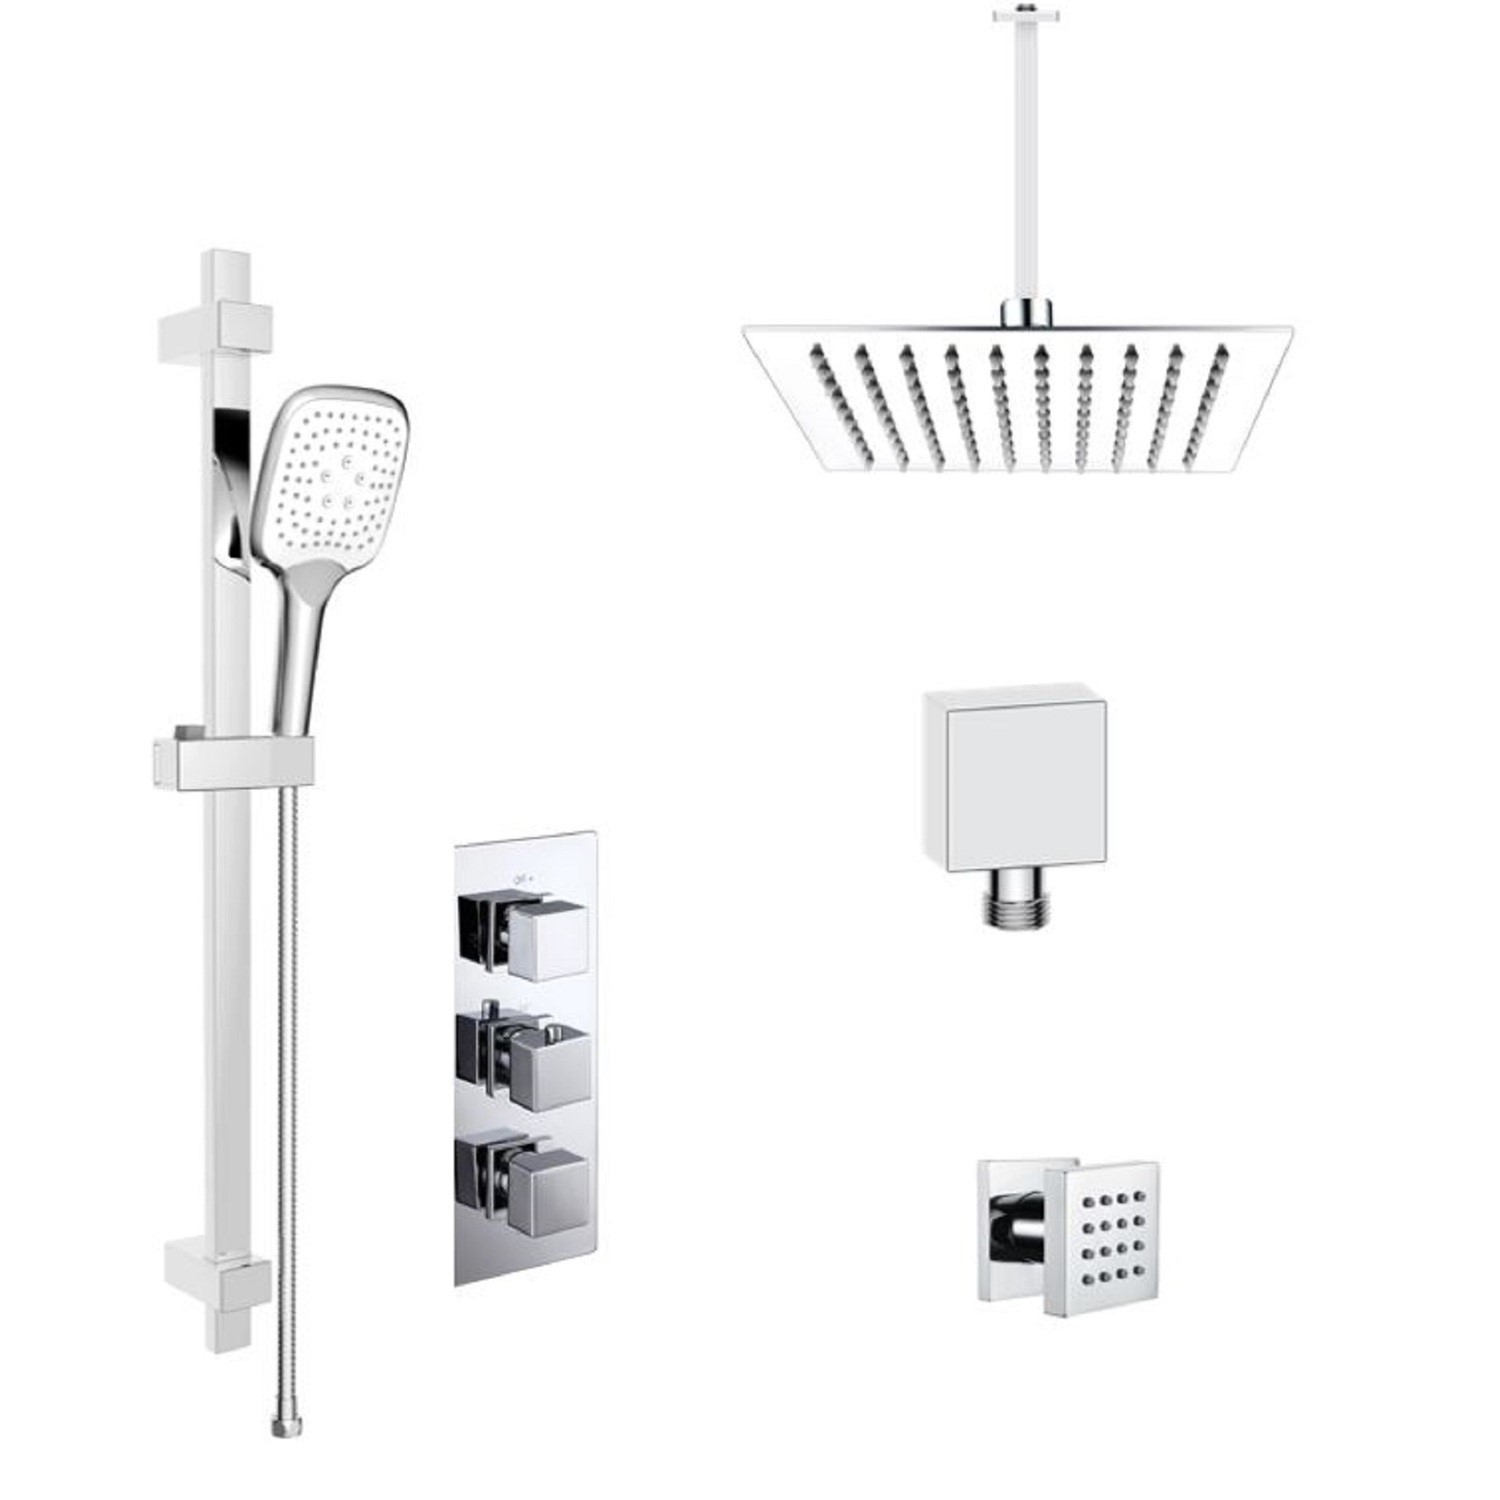 Concealed Thermostatic Mixer Shower with Slim Wall Mounted Shower Head and Square Handset- Flow